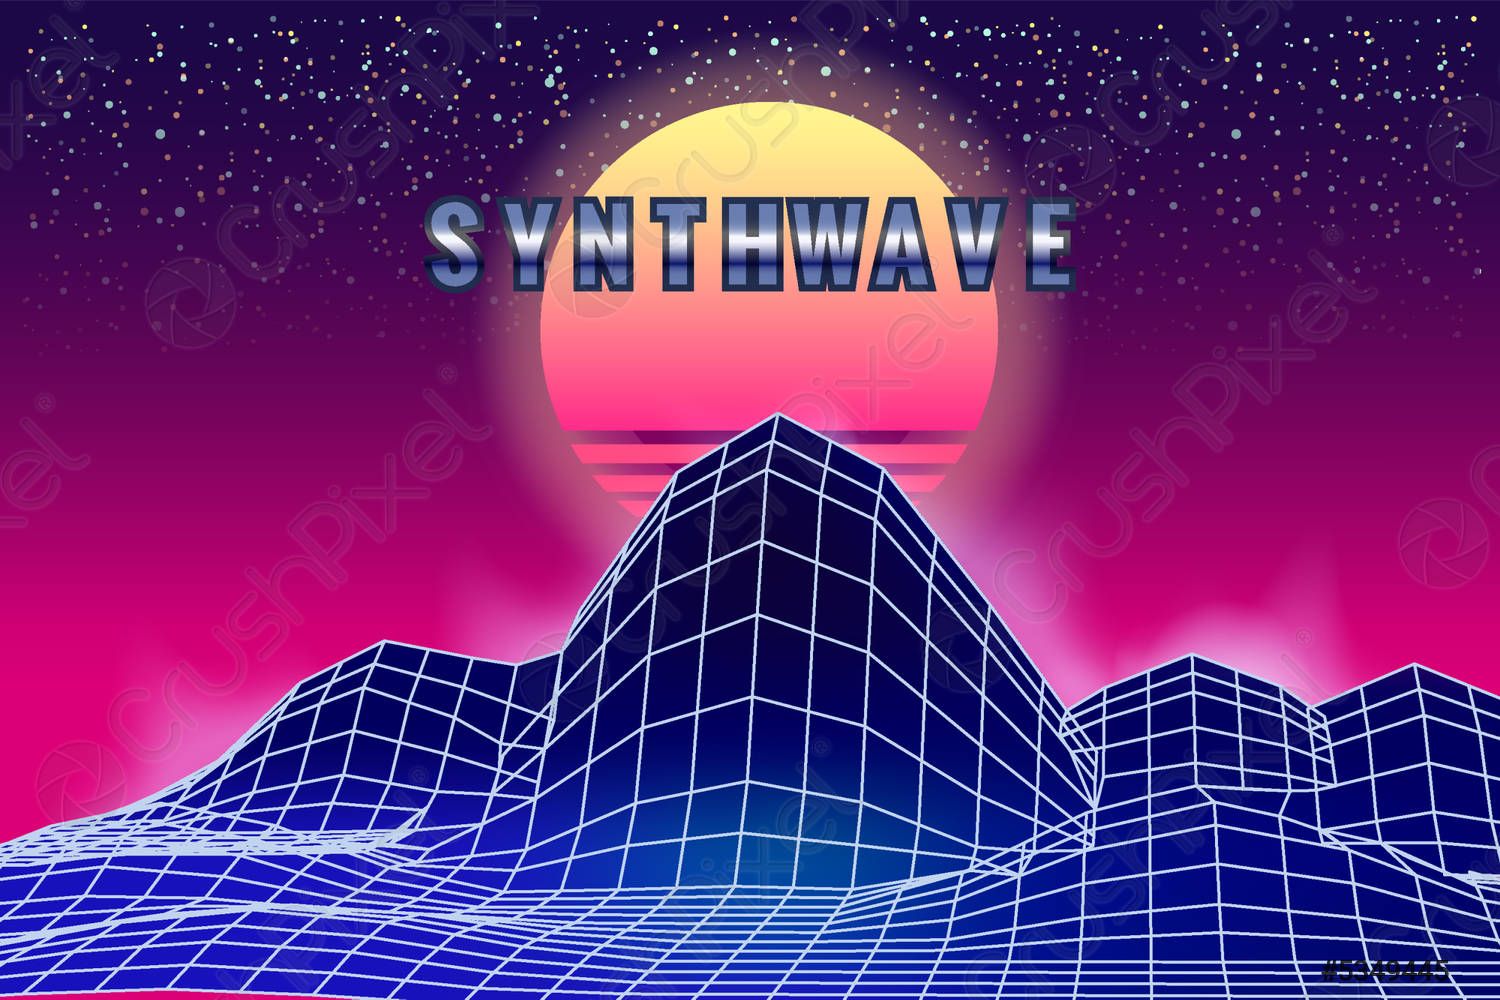 Synthwave illustration with a sun and mountains - Synthwave